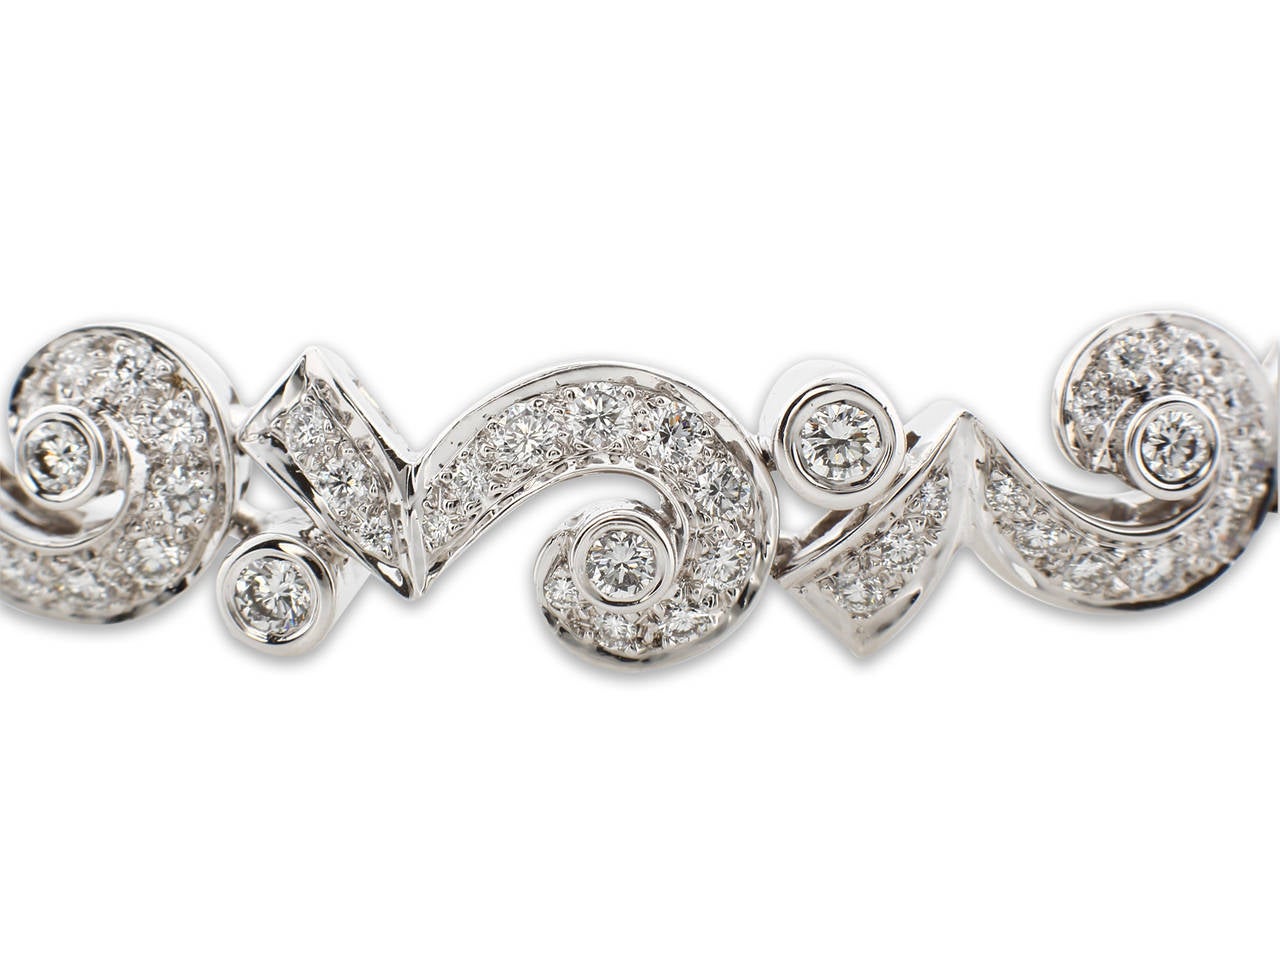 This one of a kind Chanel bracelet is a must have for the Chanel lover. It has been constructed from 18k white gold with brilliant diamonds. This beautiful accessory was hand crafted for a top Chanel client, designed specifically for her.